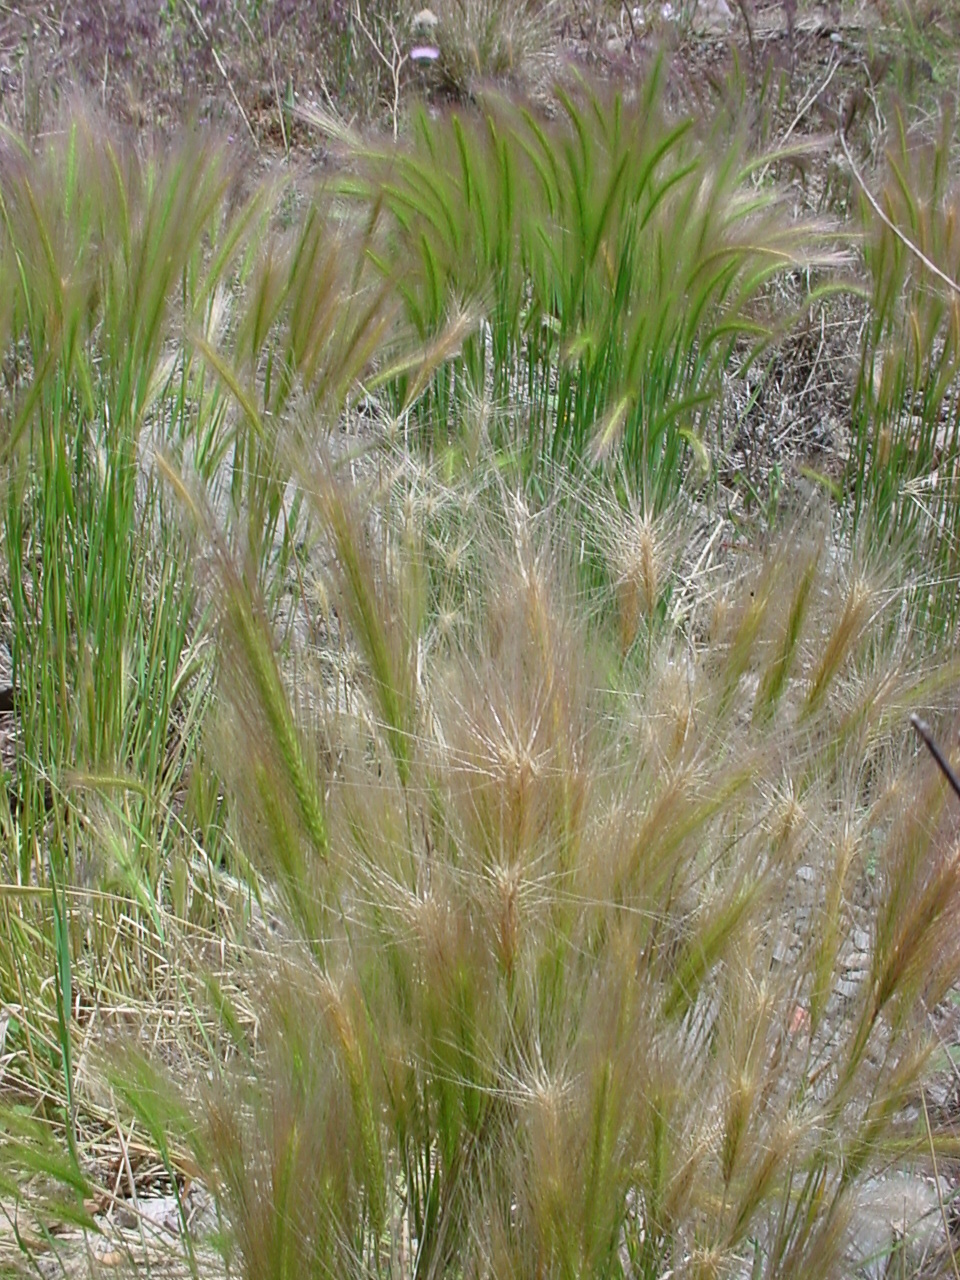 Tufty growth habit of several plants, some with reddish brown seedheads and some with greener seedheads